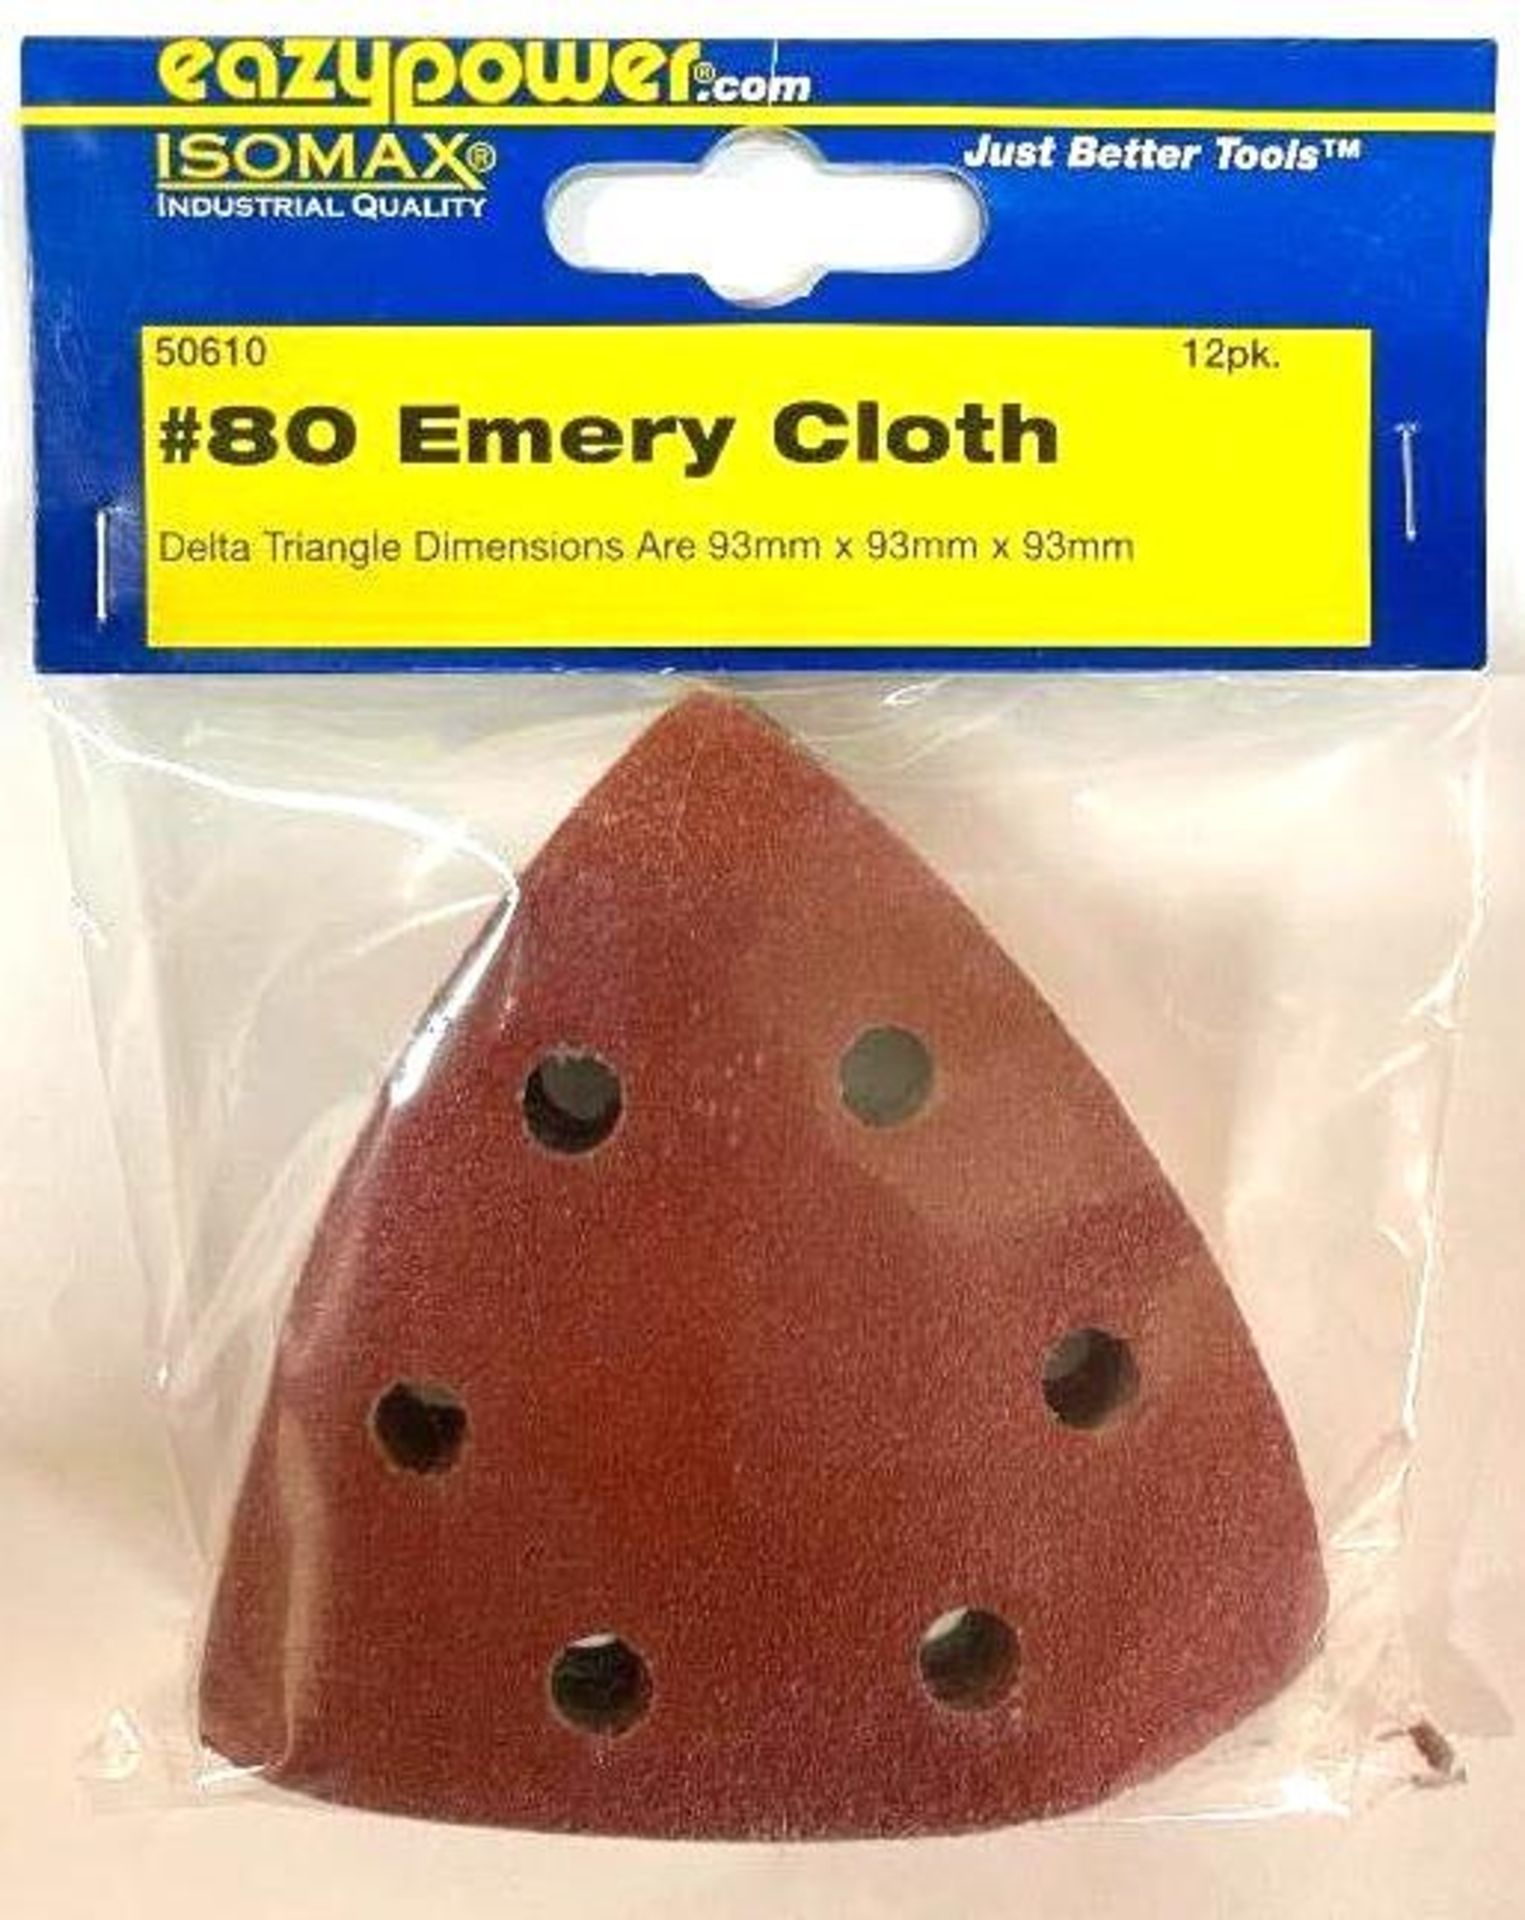 DESCRIPTION (200) 12CT PACKS OF #80 EMERY CLOTH BRAND/MODEL EAZY POWER 50610 THIS LOT IS ONE MONEY Q